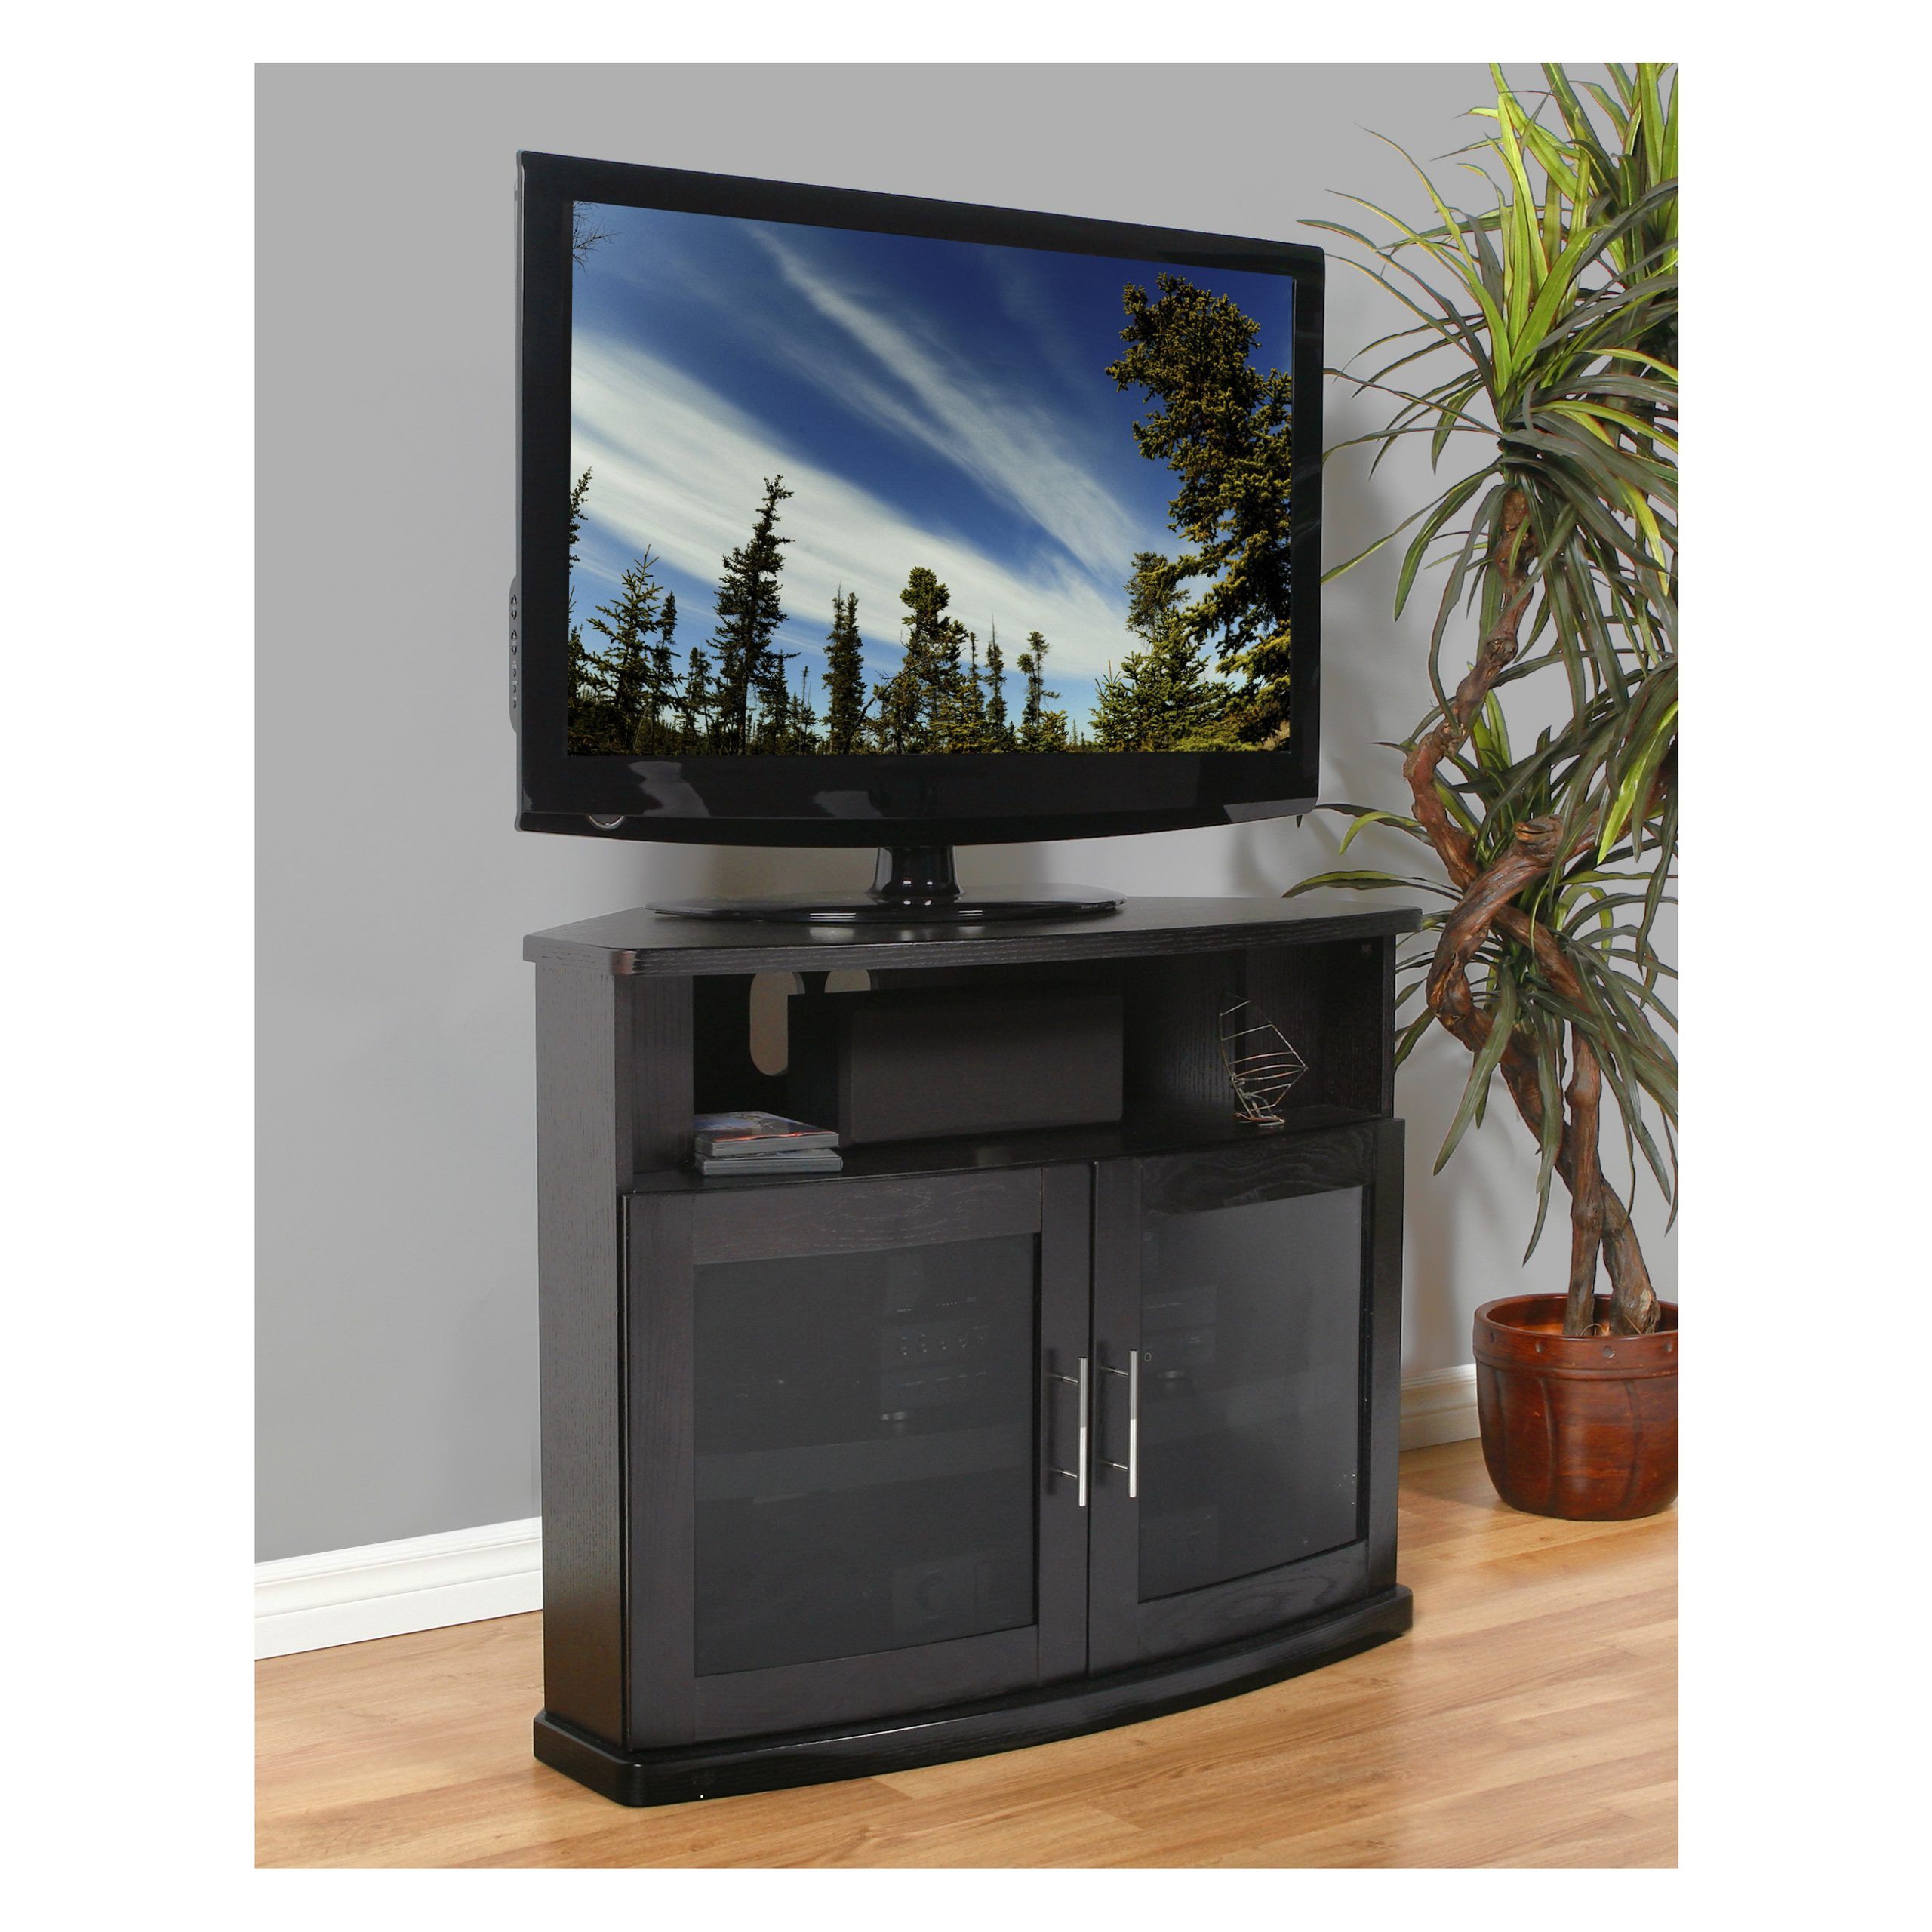 Plateau Newport 40 B Corner Wood 40 In. Tv Stand – Black With Regard To Corner Entertainment Tv Stands (Gallery 4 of 20)